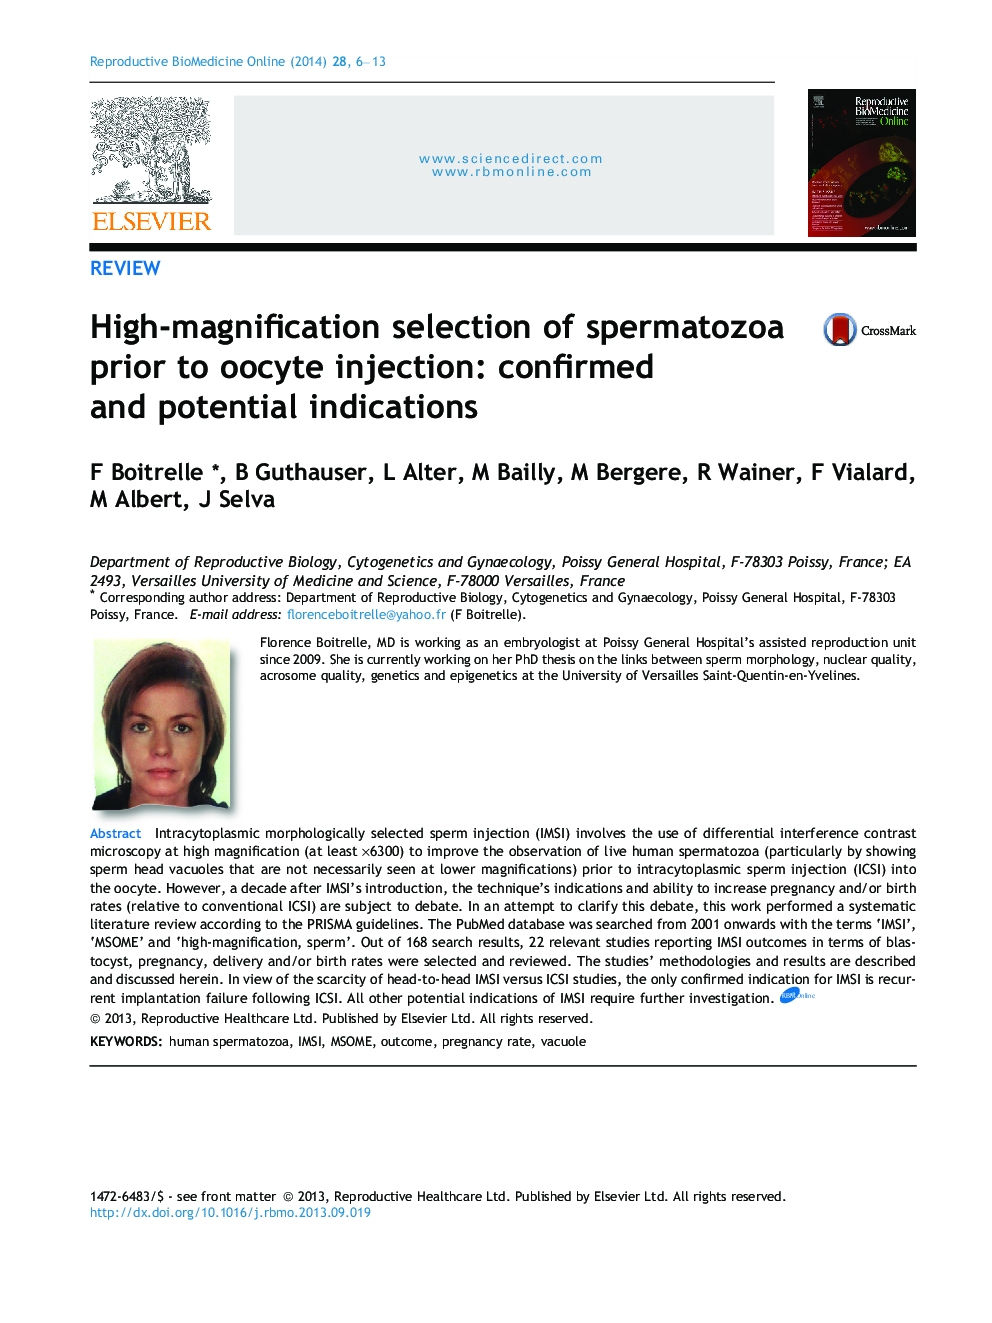 High-magnification selection of spermatozoa prior to oocyte injection: confirmed and potential indications 